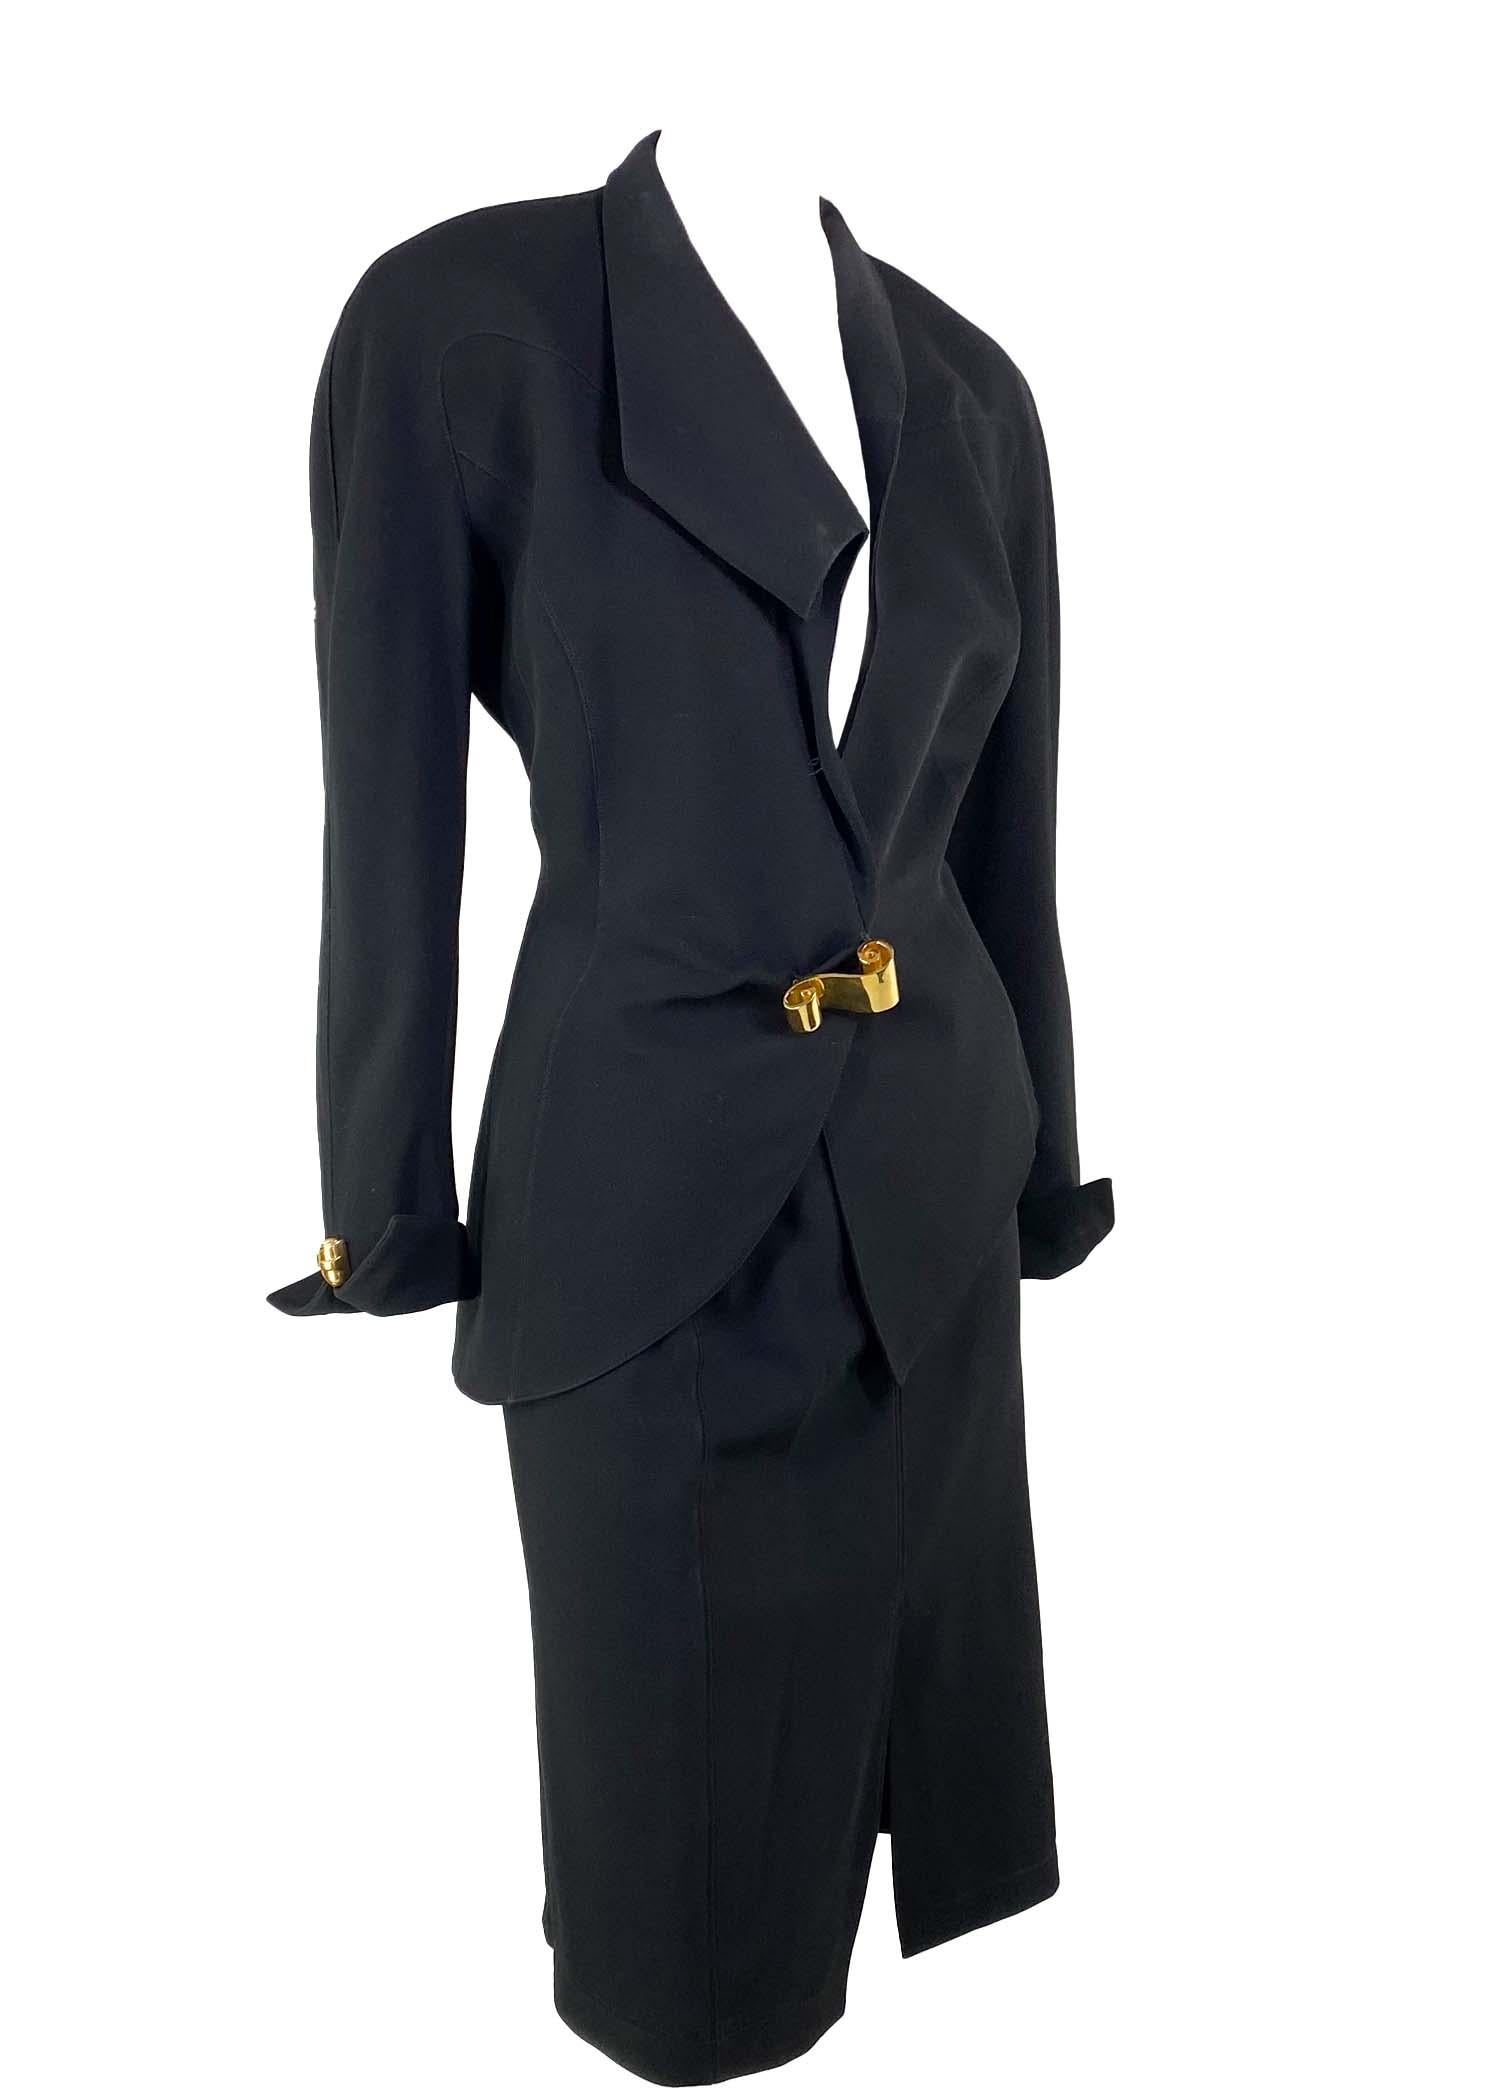 Presenting a sculptural Thierry Mugler skirt suit, designed by Manfred Mugler. From the 1990s, this suit features masterful design and tailoring. The blazer features a sculptural curved lapel with gold metal scroll closures at the front of the